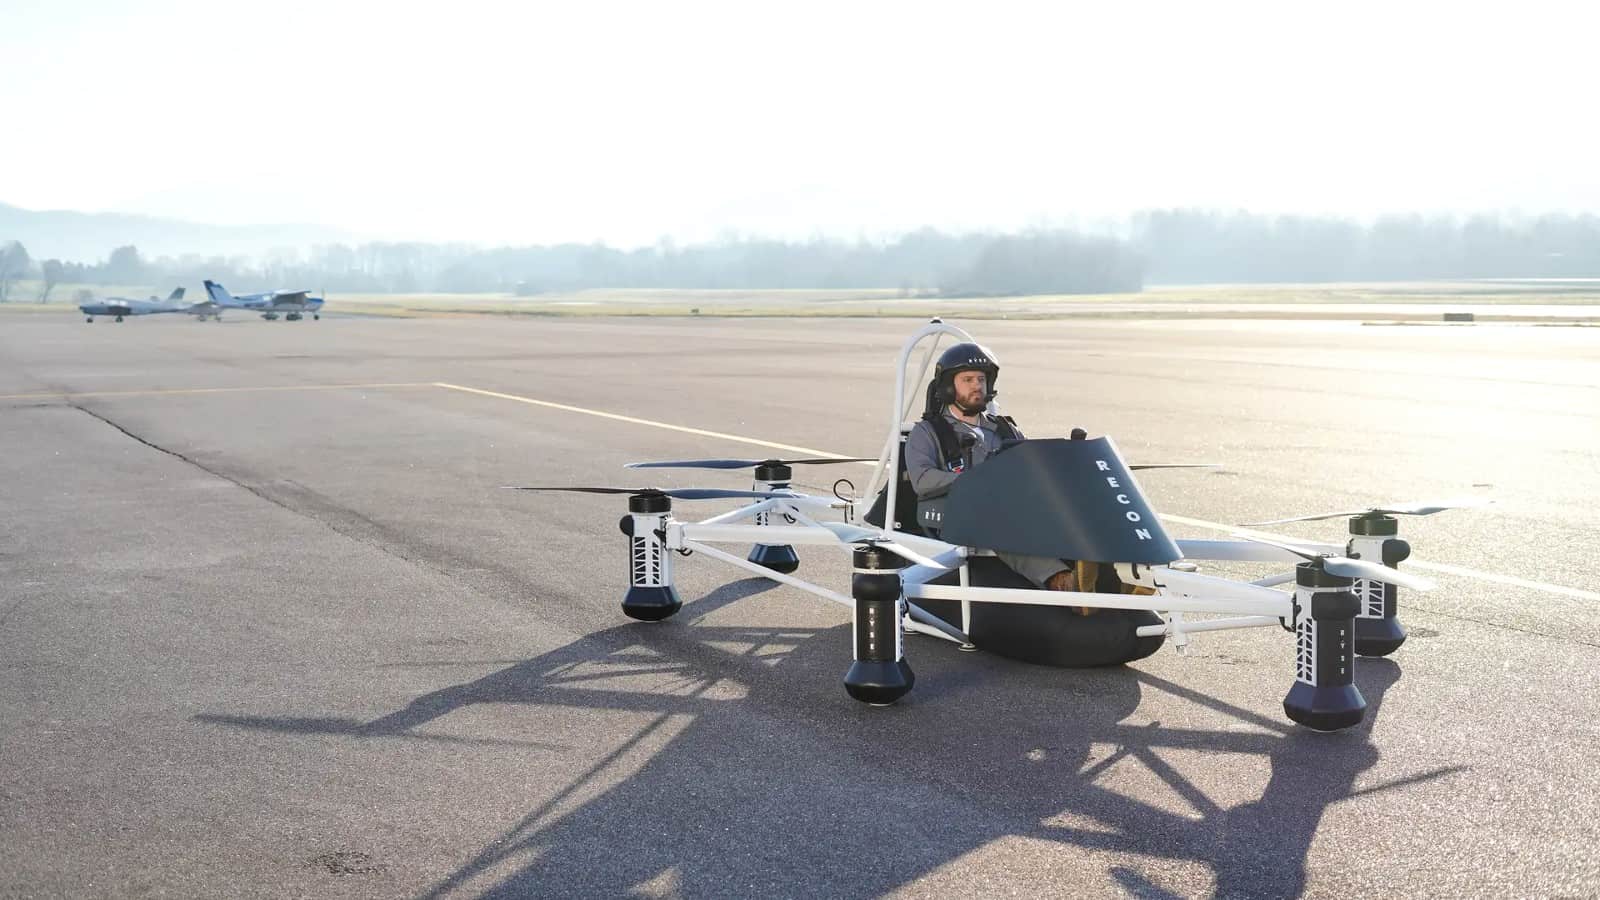 Ryse Recon ultralight personal eVTOL completes first piloted flight